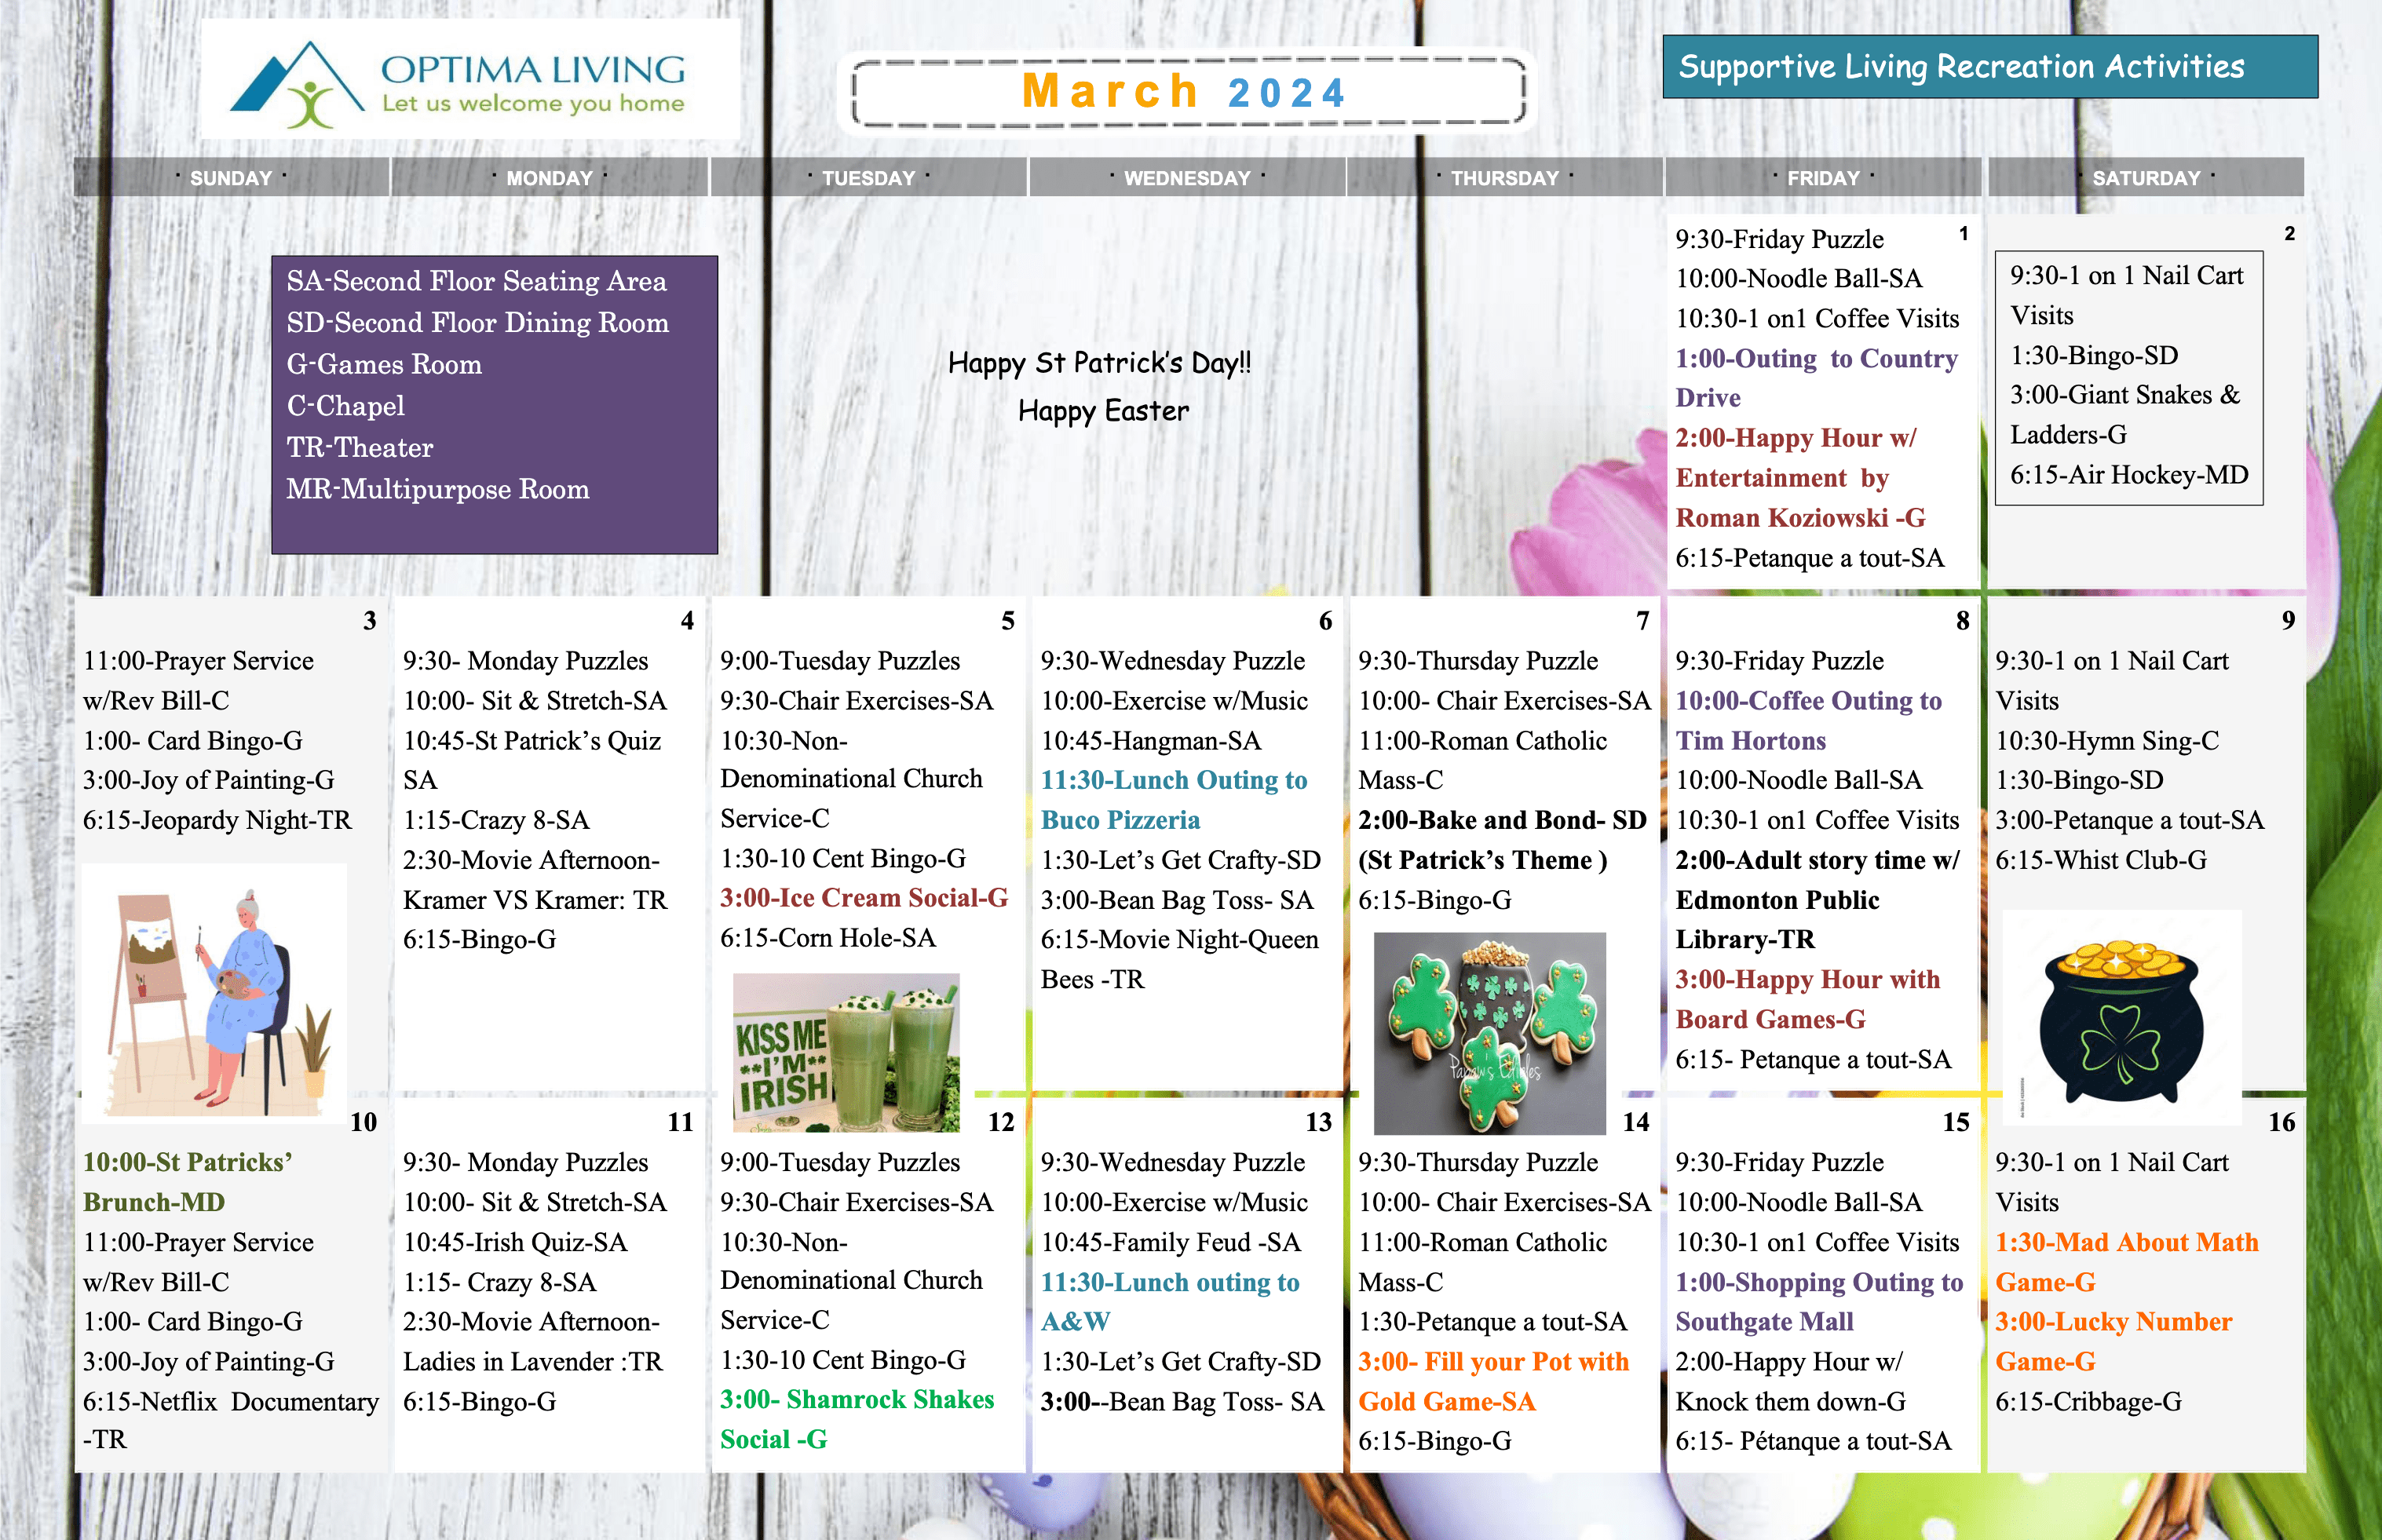 Laurel Heights March 1-16 2024 supportive living event calendar